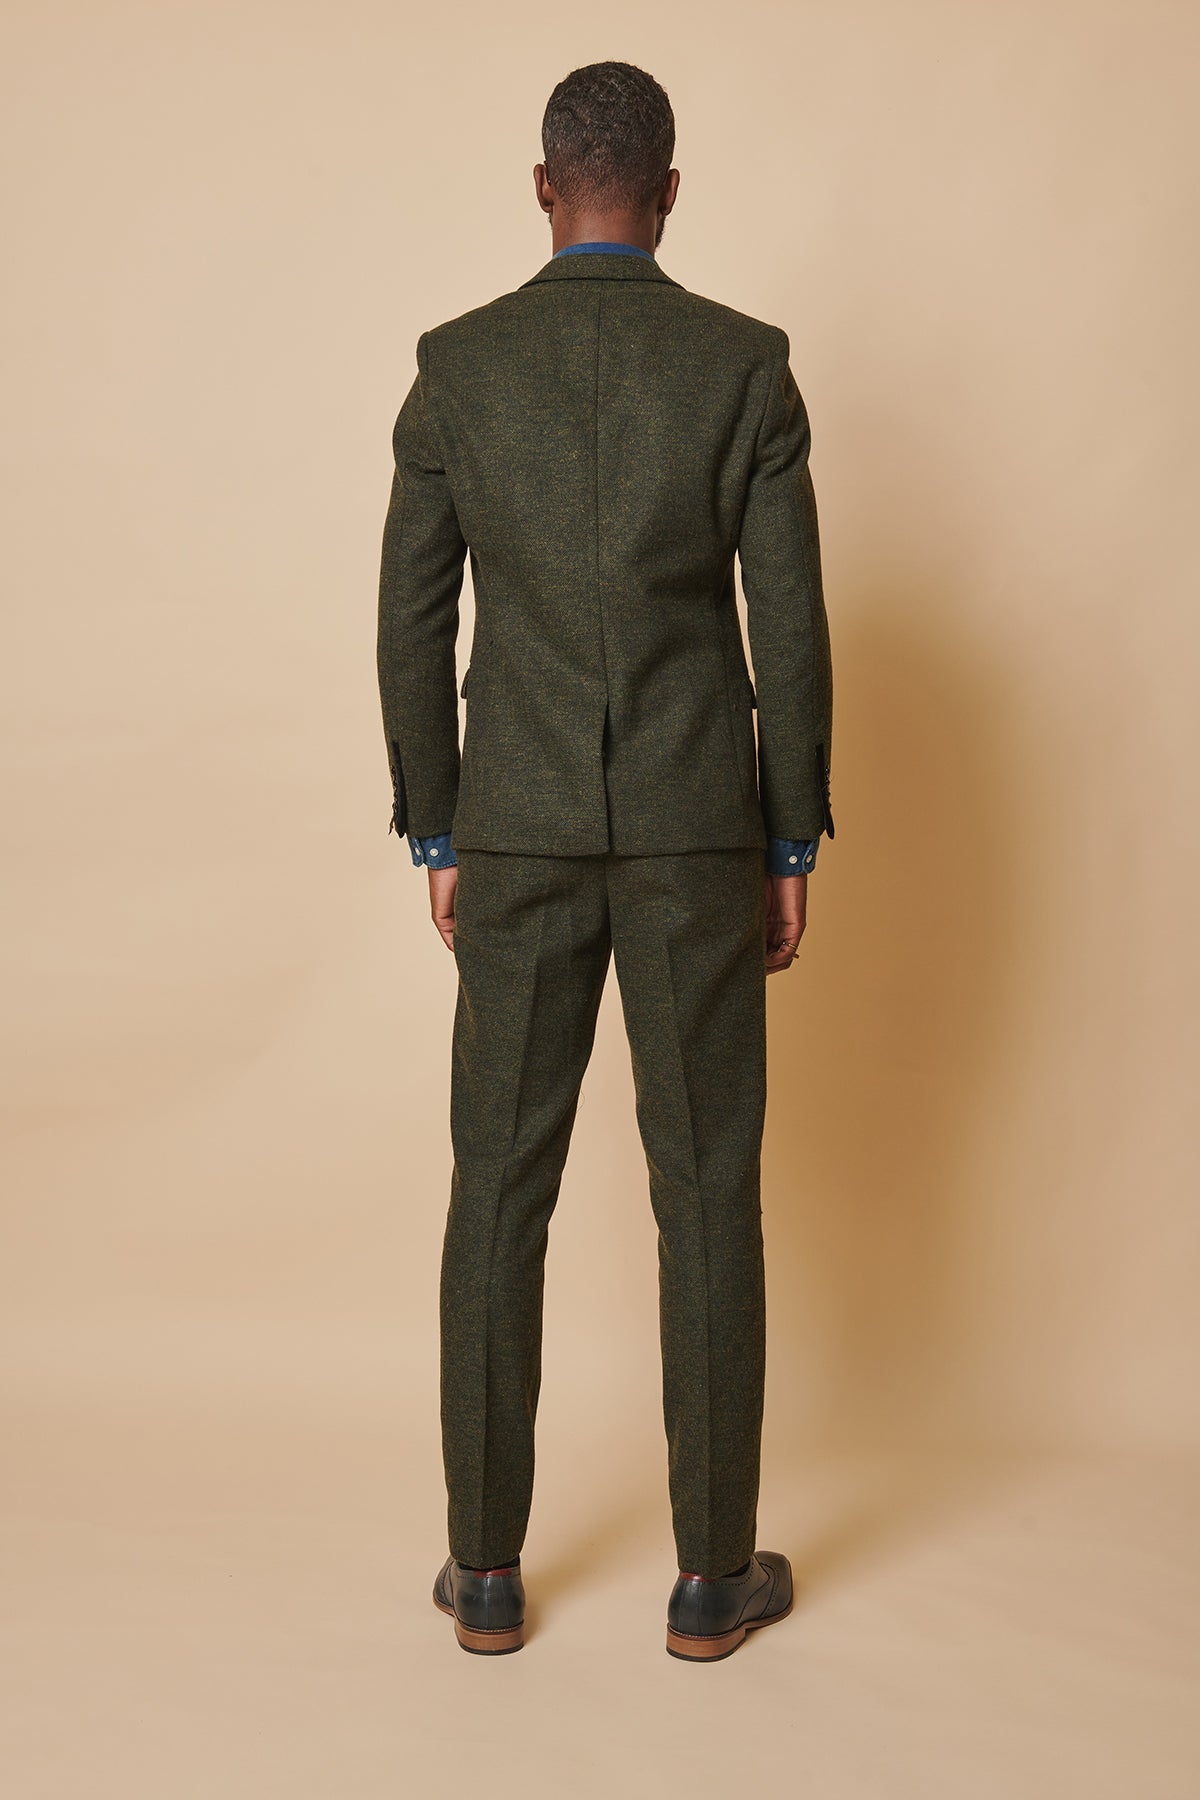 The WHU Collection - MARLOW Olive Green Tweed Three Piece Suit As Worn By Aaron Cresswell